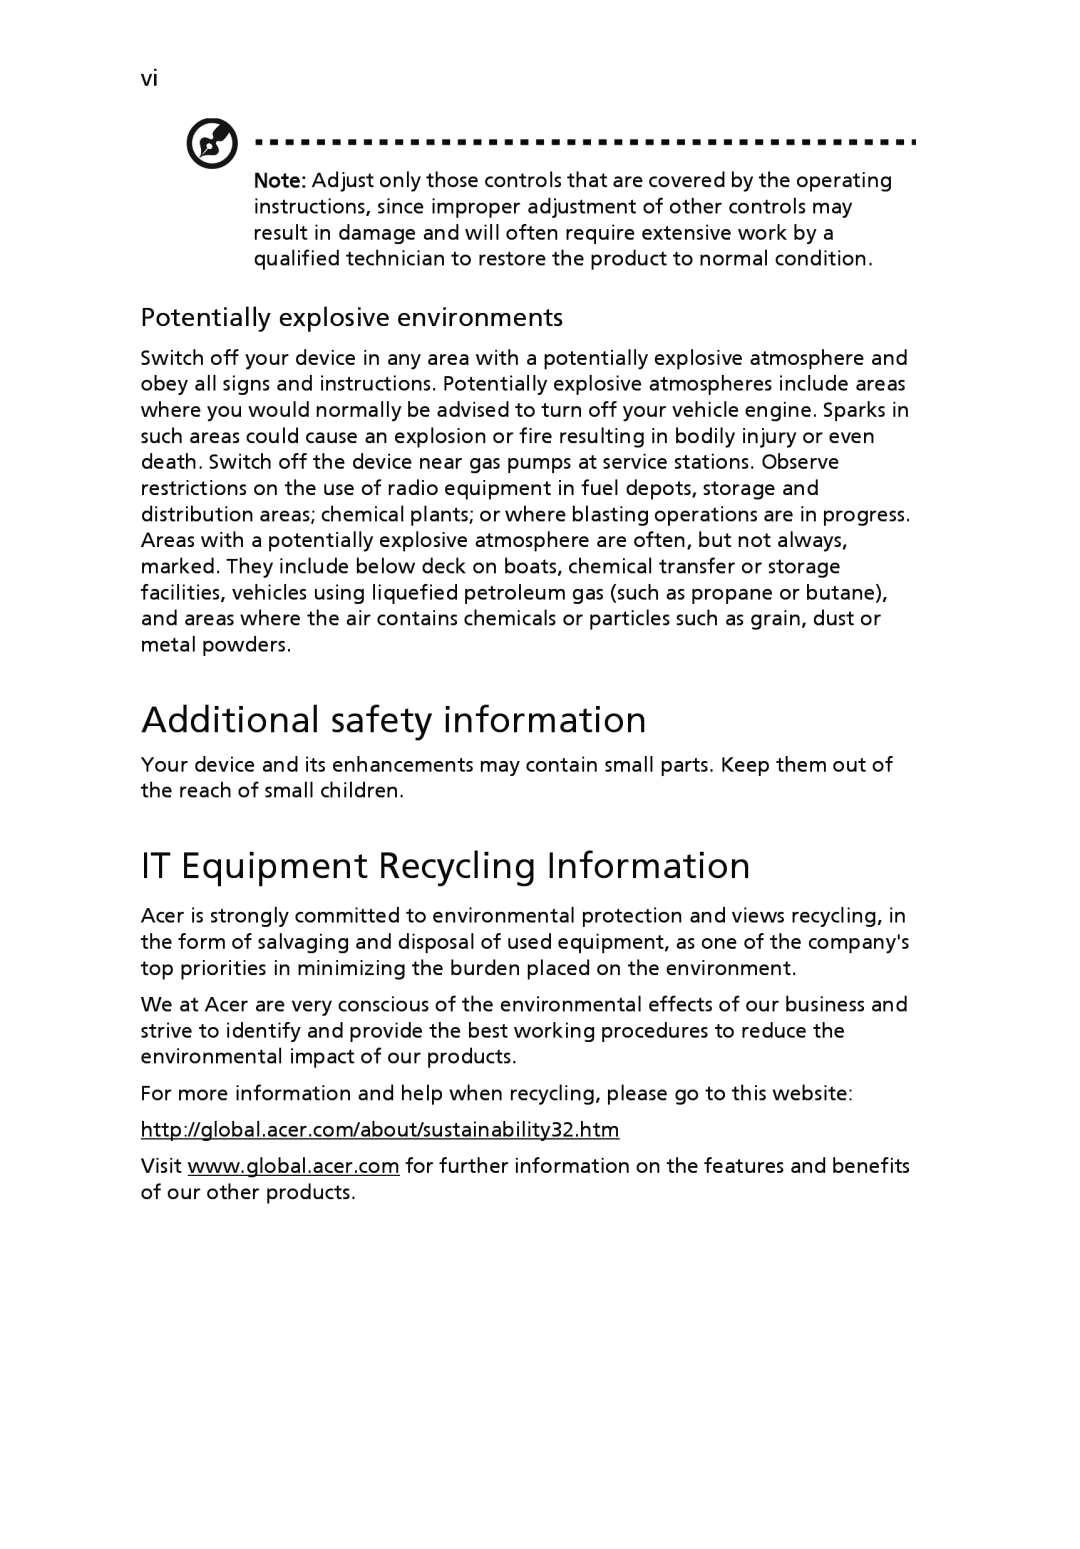 Acer V193 manual Additional safety information, IT Equipment Recycling Information, Potentially explosive environments 